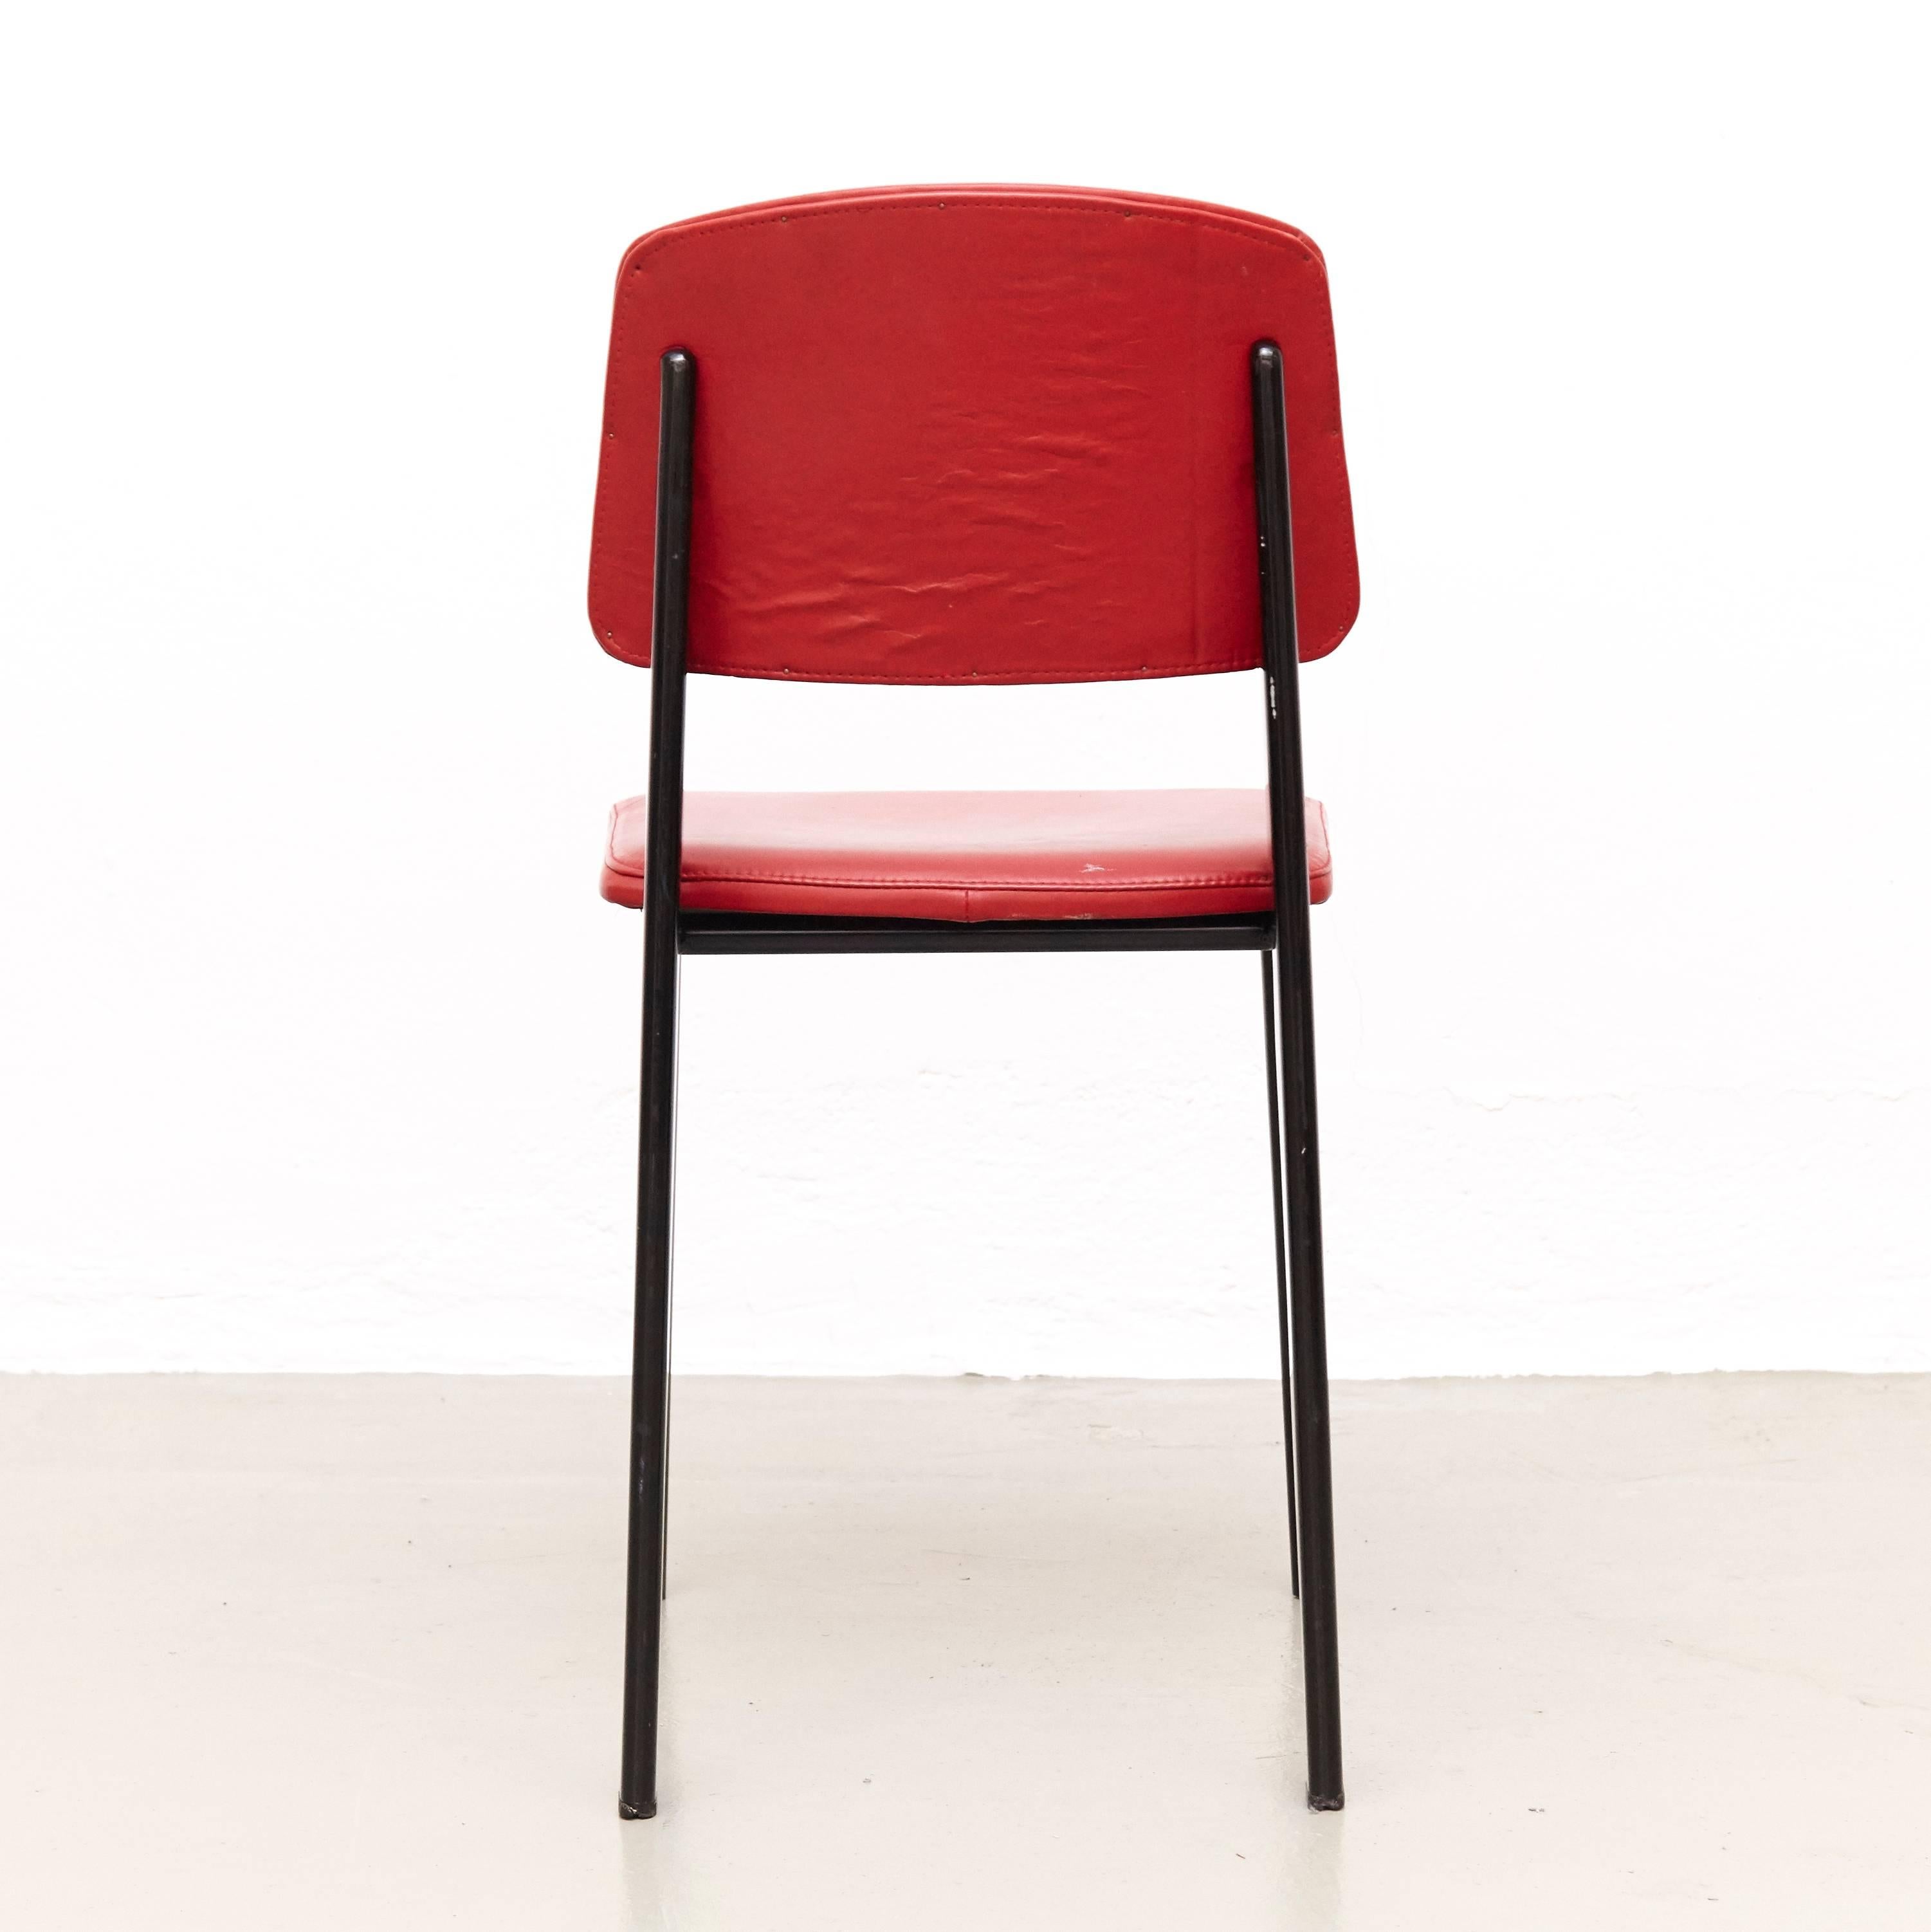 French Jean Prouvé Mid Century Modern Red Upholstered Standard Chair, circa 1950